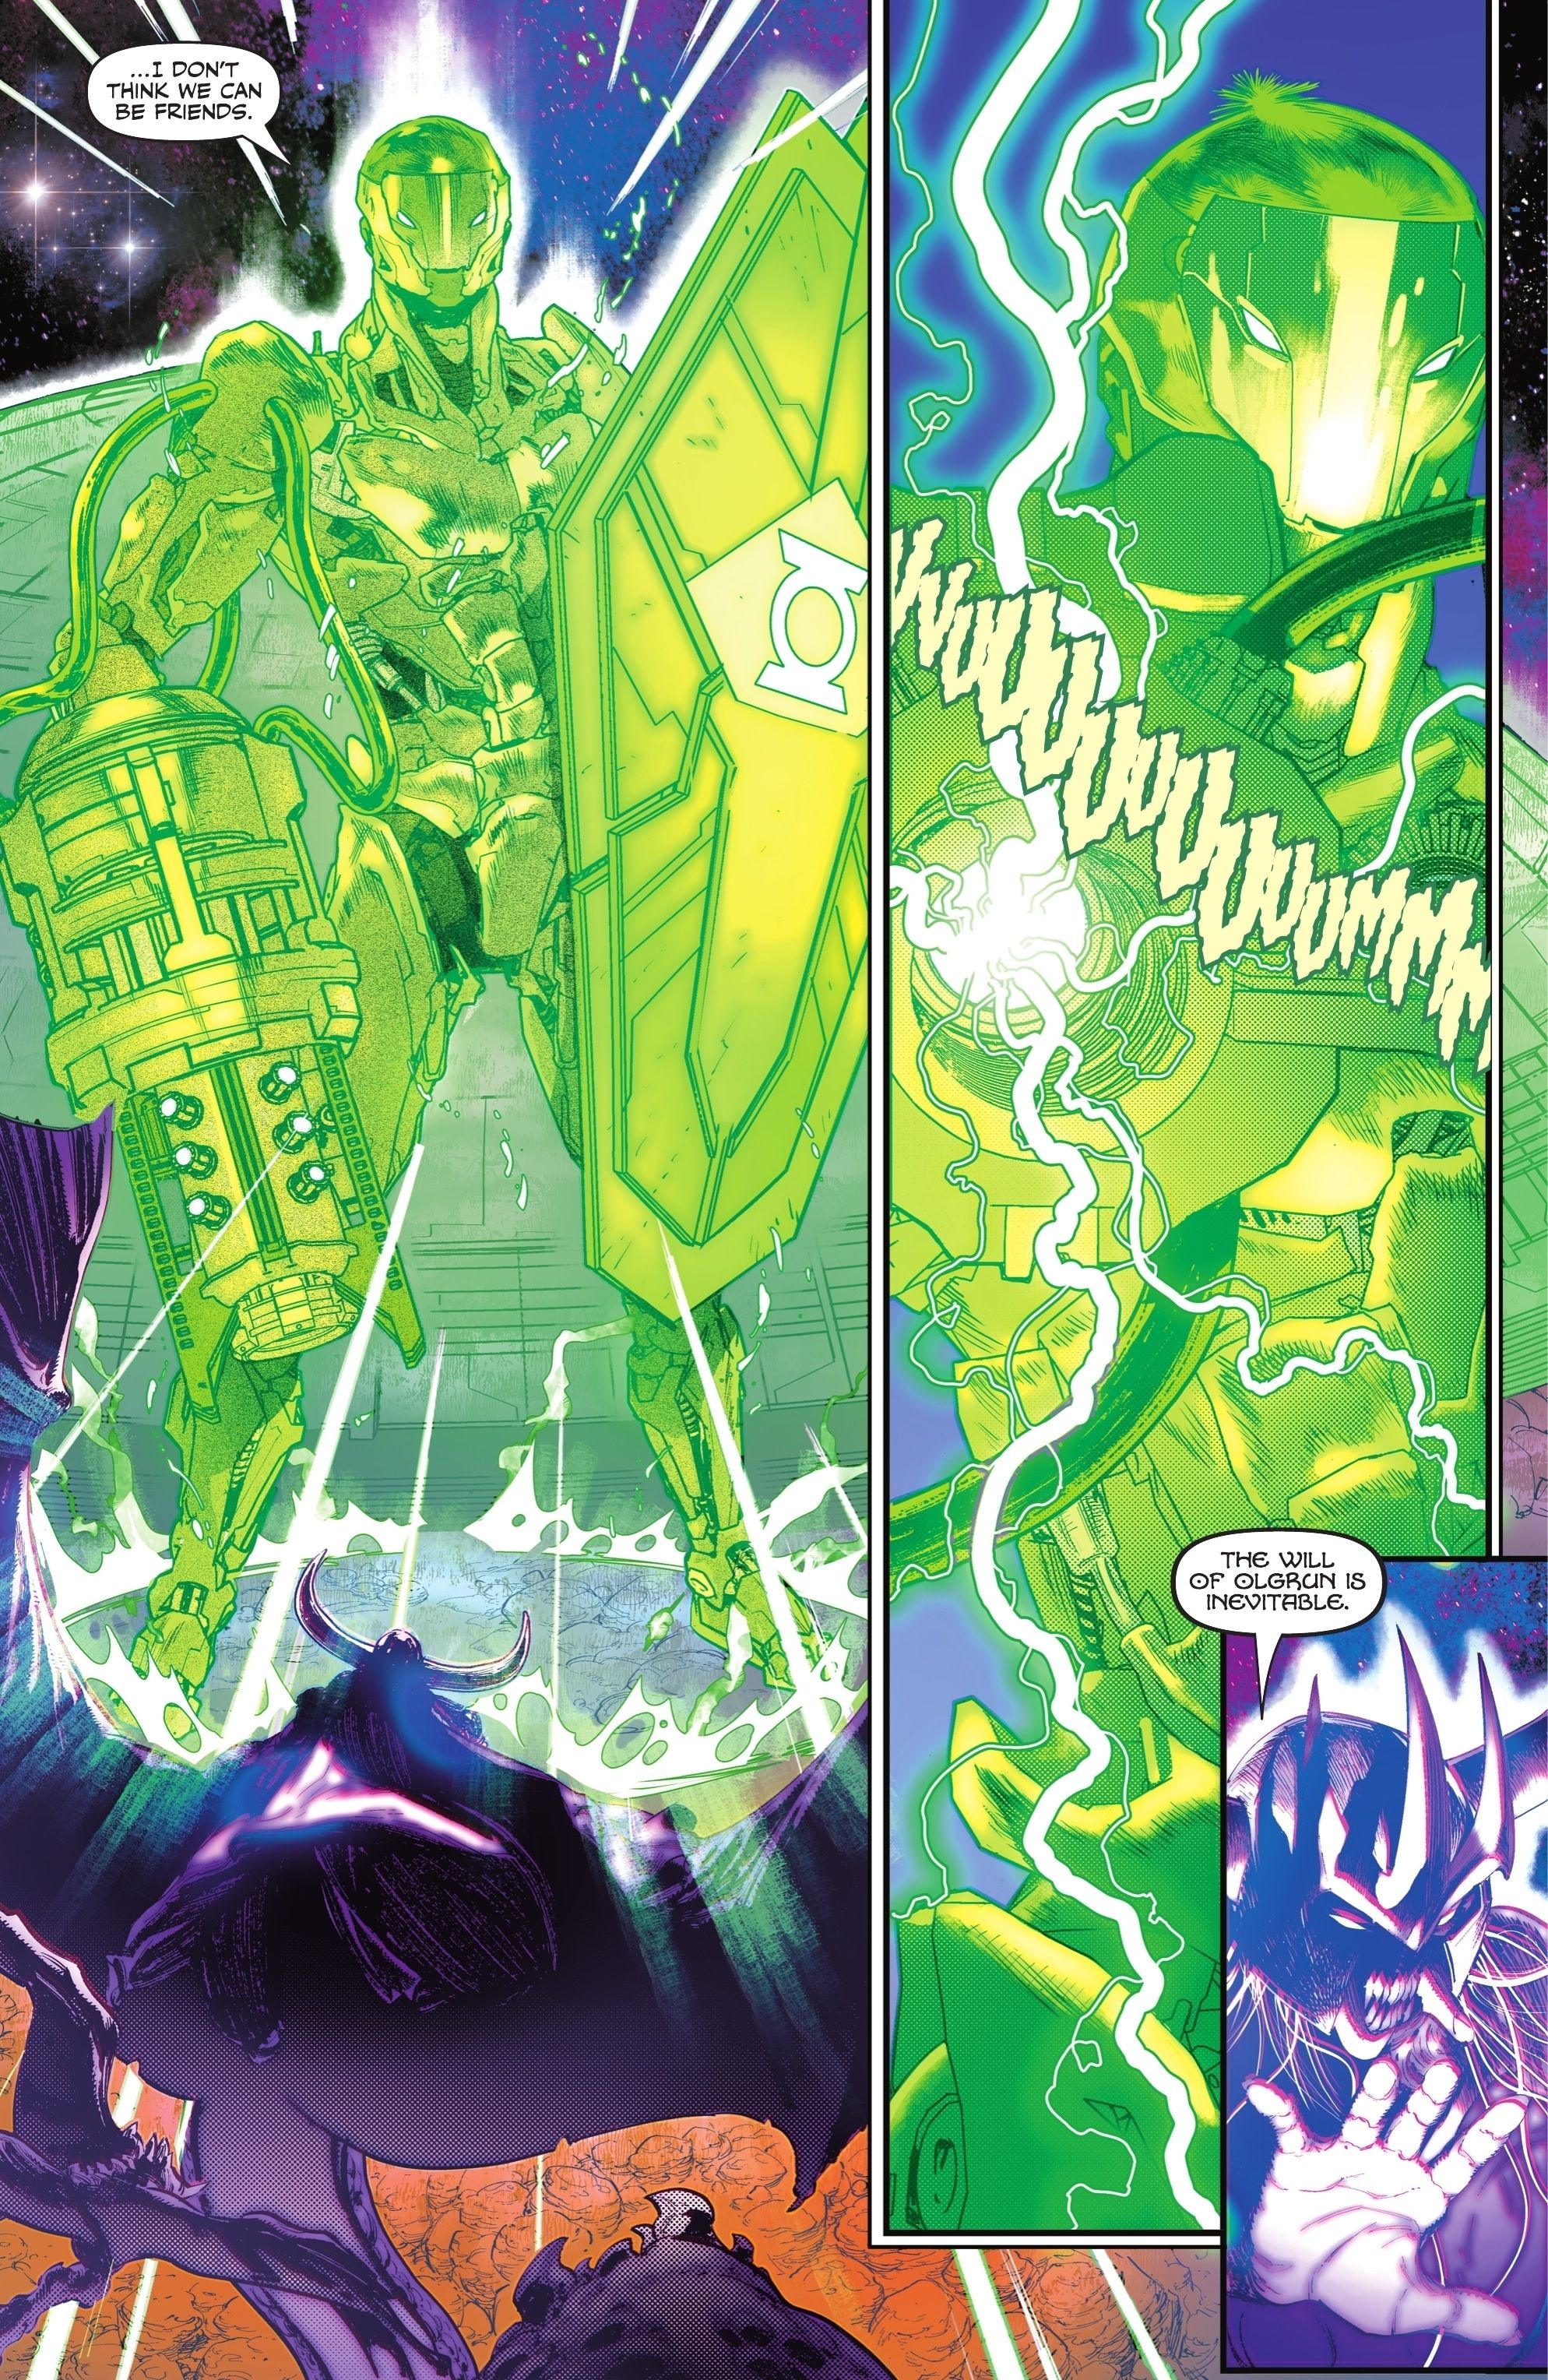 Green Lantern Just Forged His Own Iron Man Armor in Jaw-Dropping Power Feat